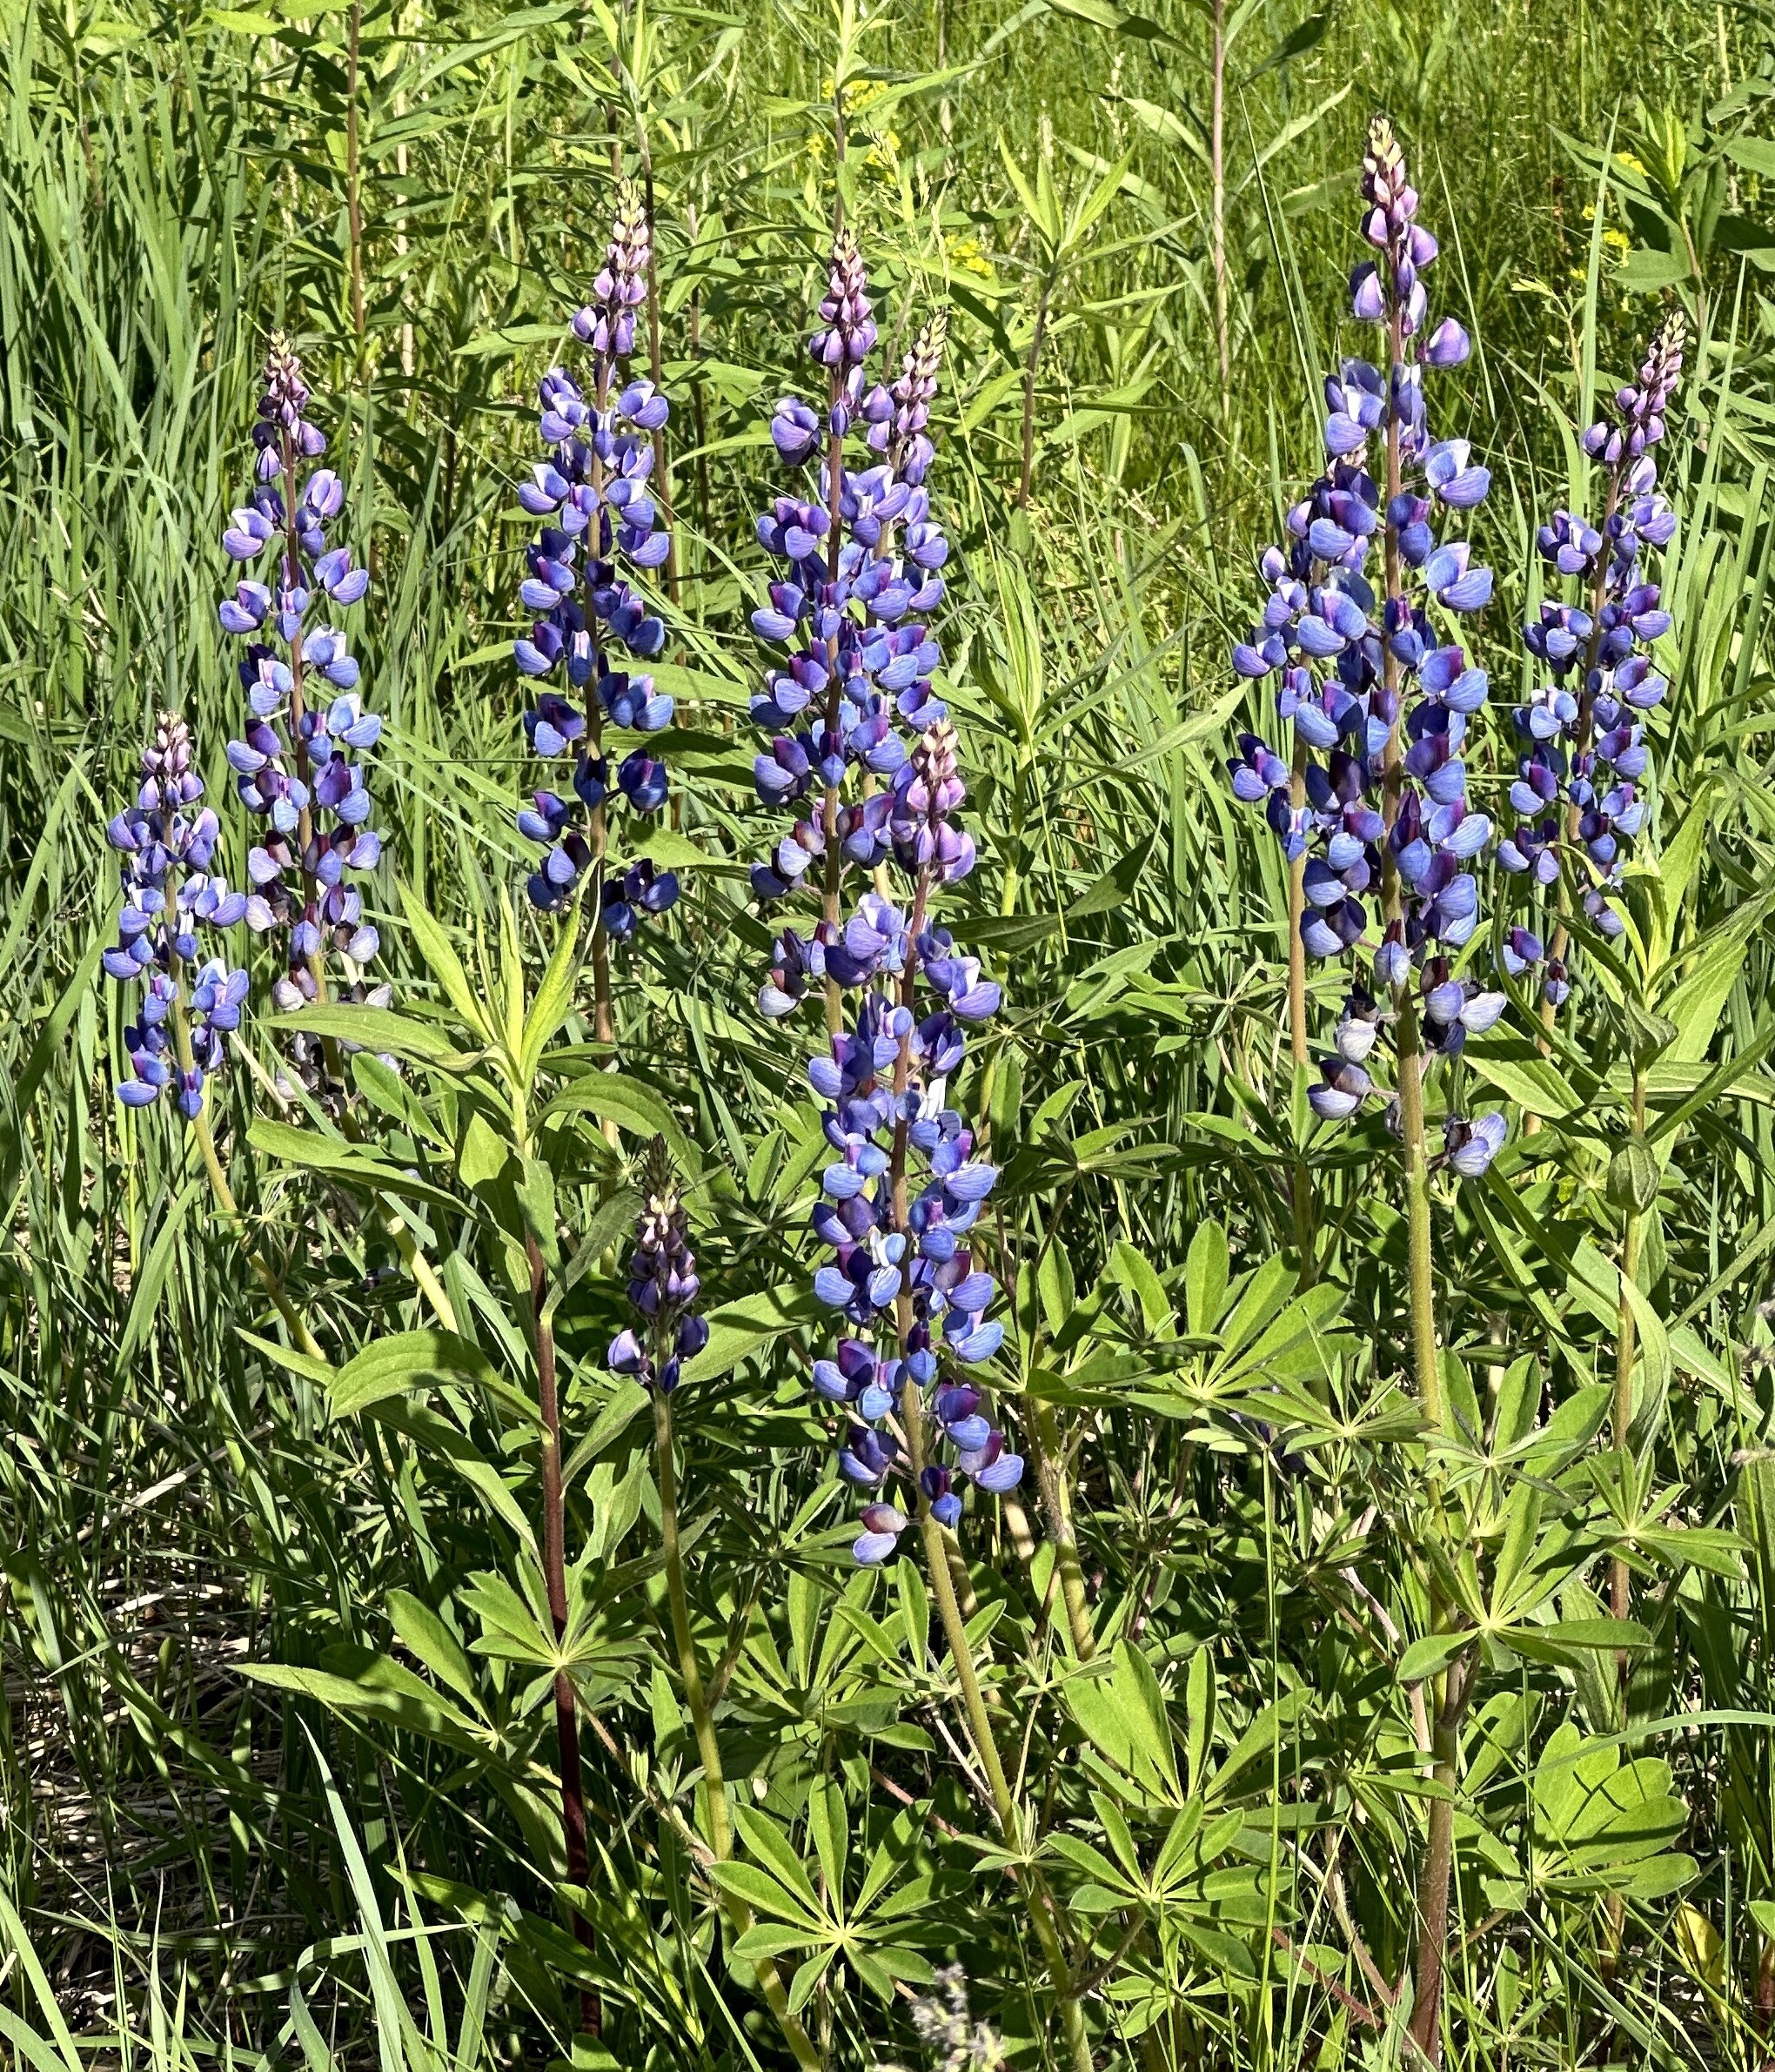 Purple lupine blooms in a sea of green grass and other prairie plants